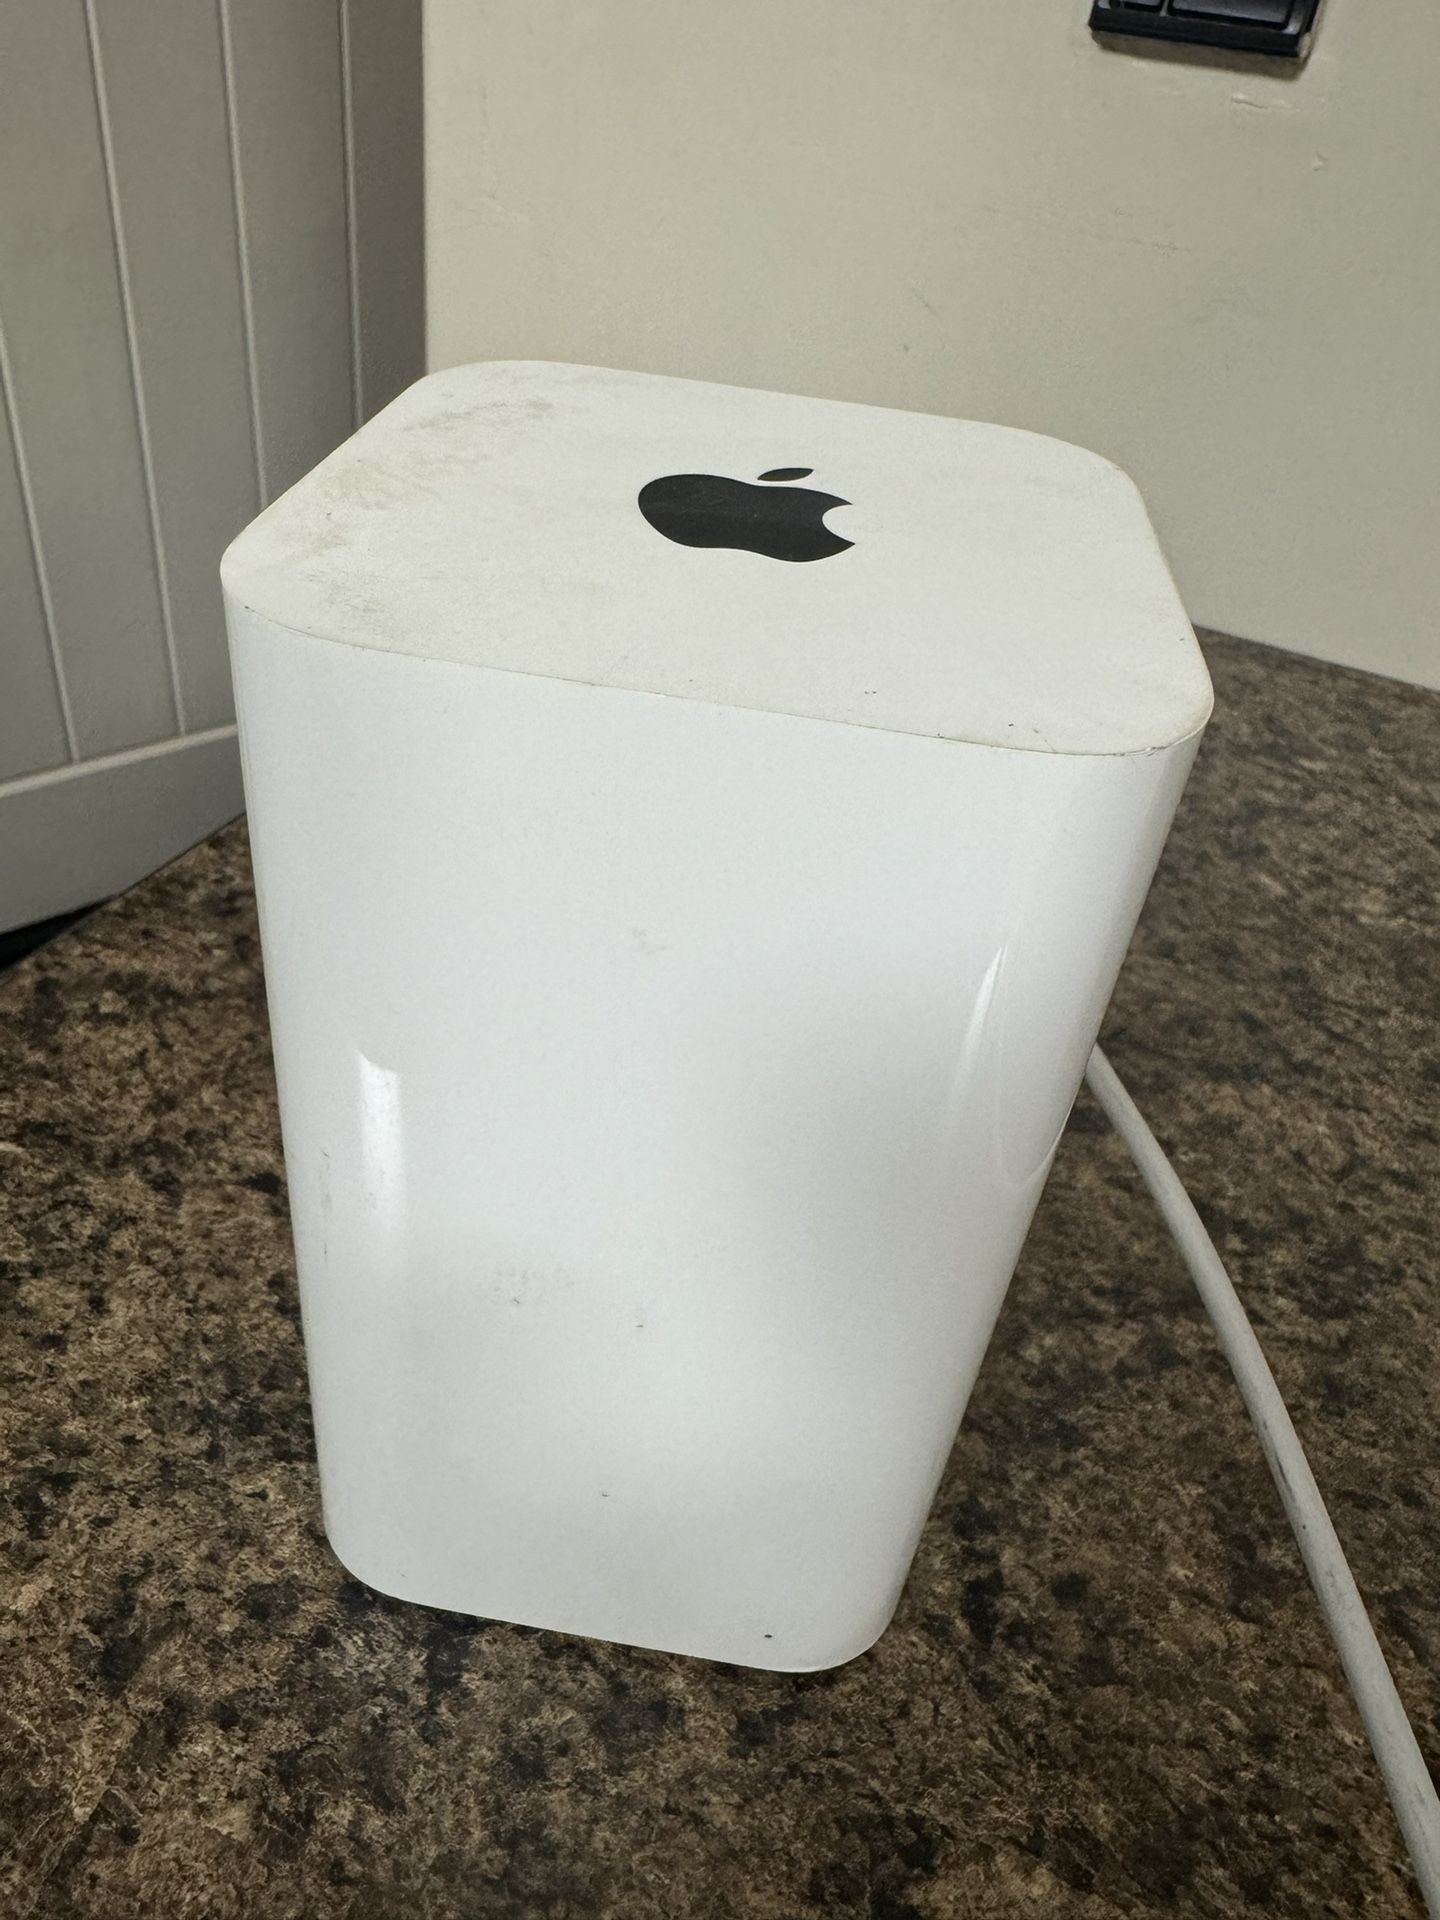 Apple AirPort Extreme Base Station Wireless Router